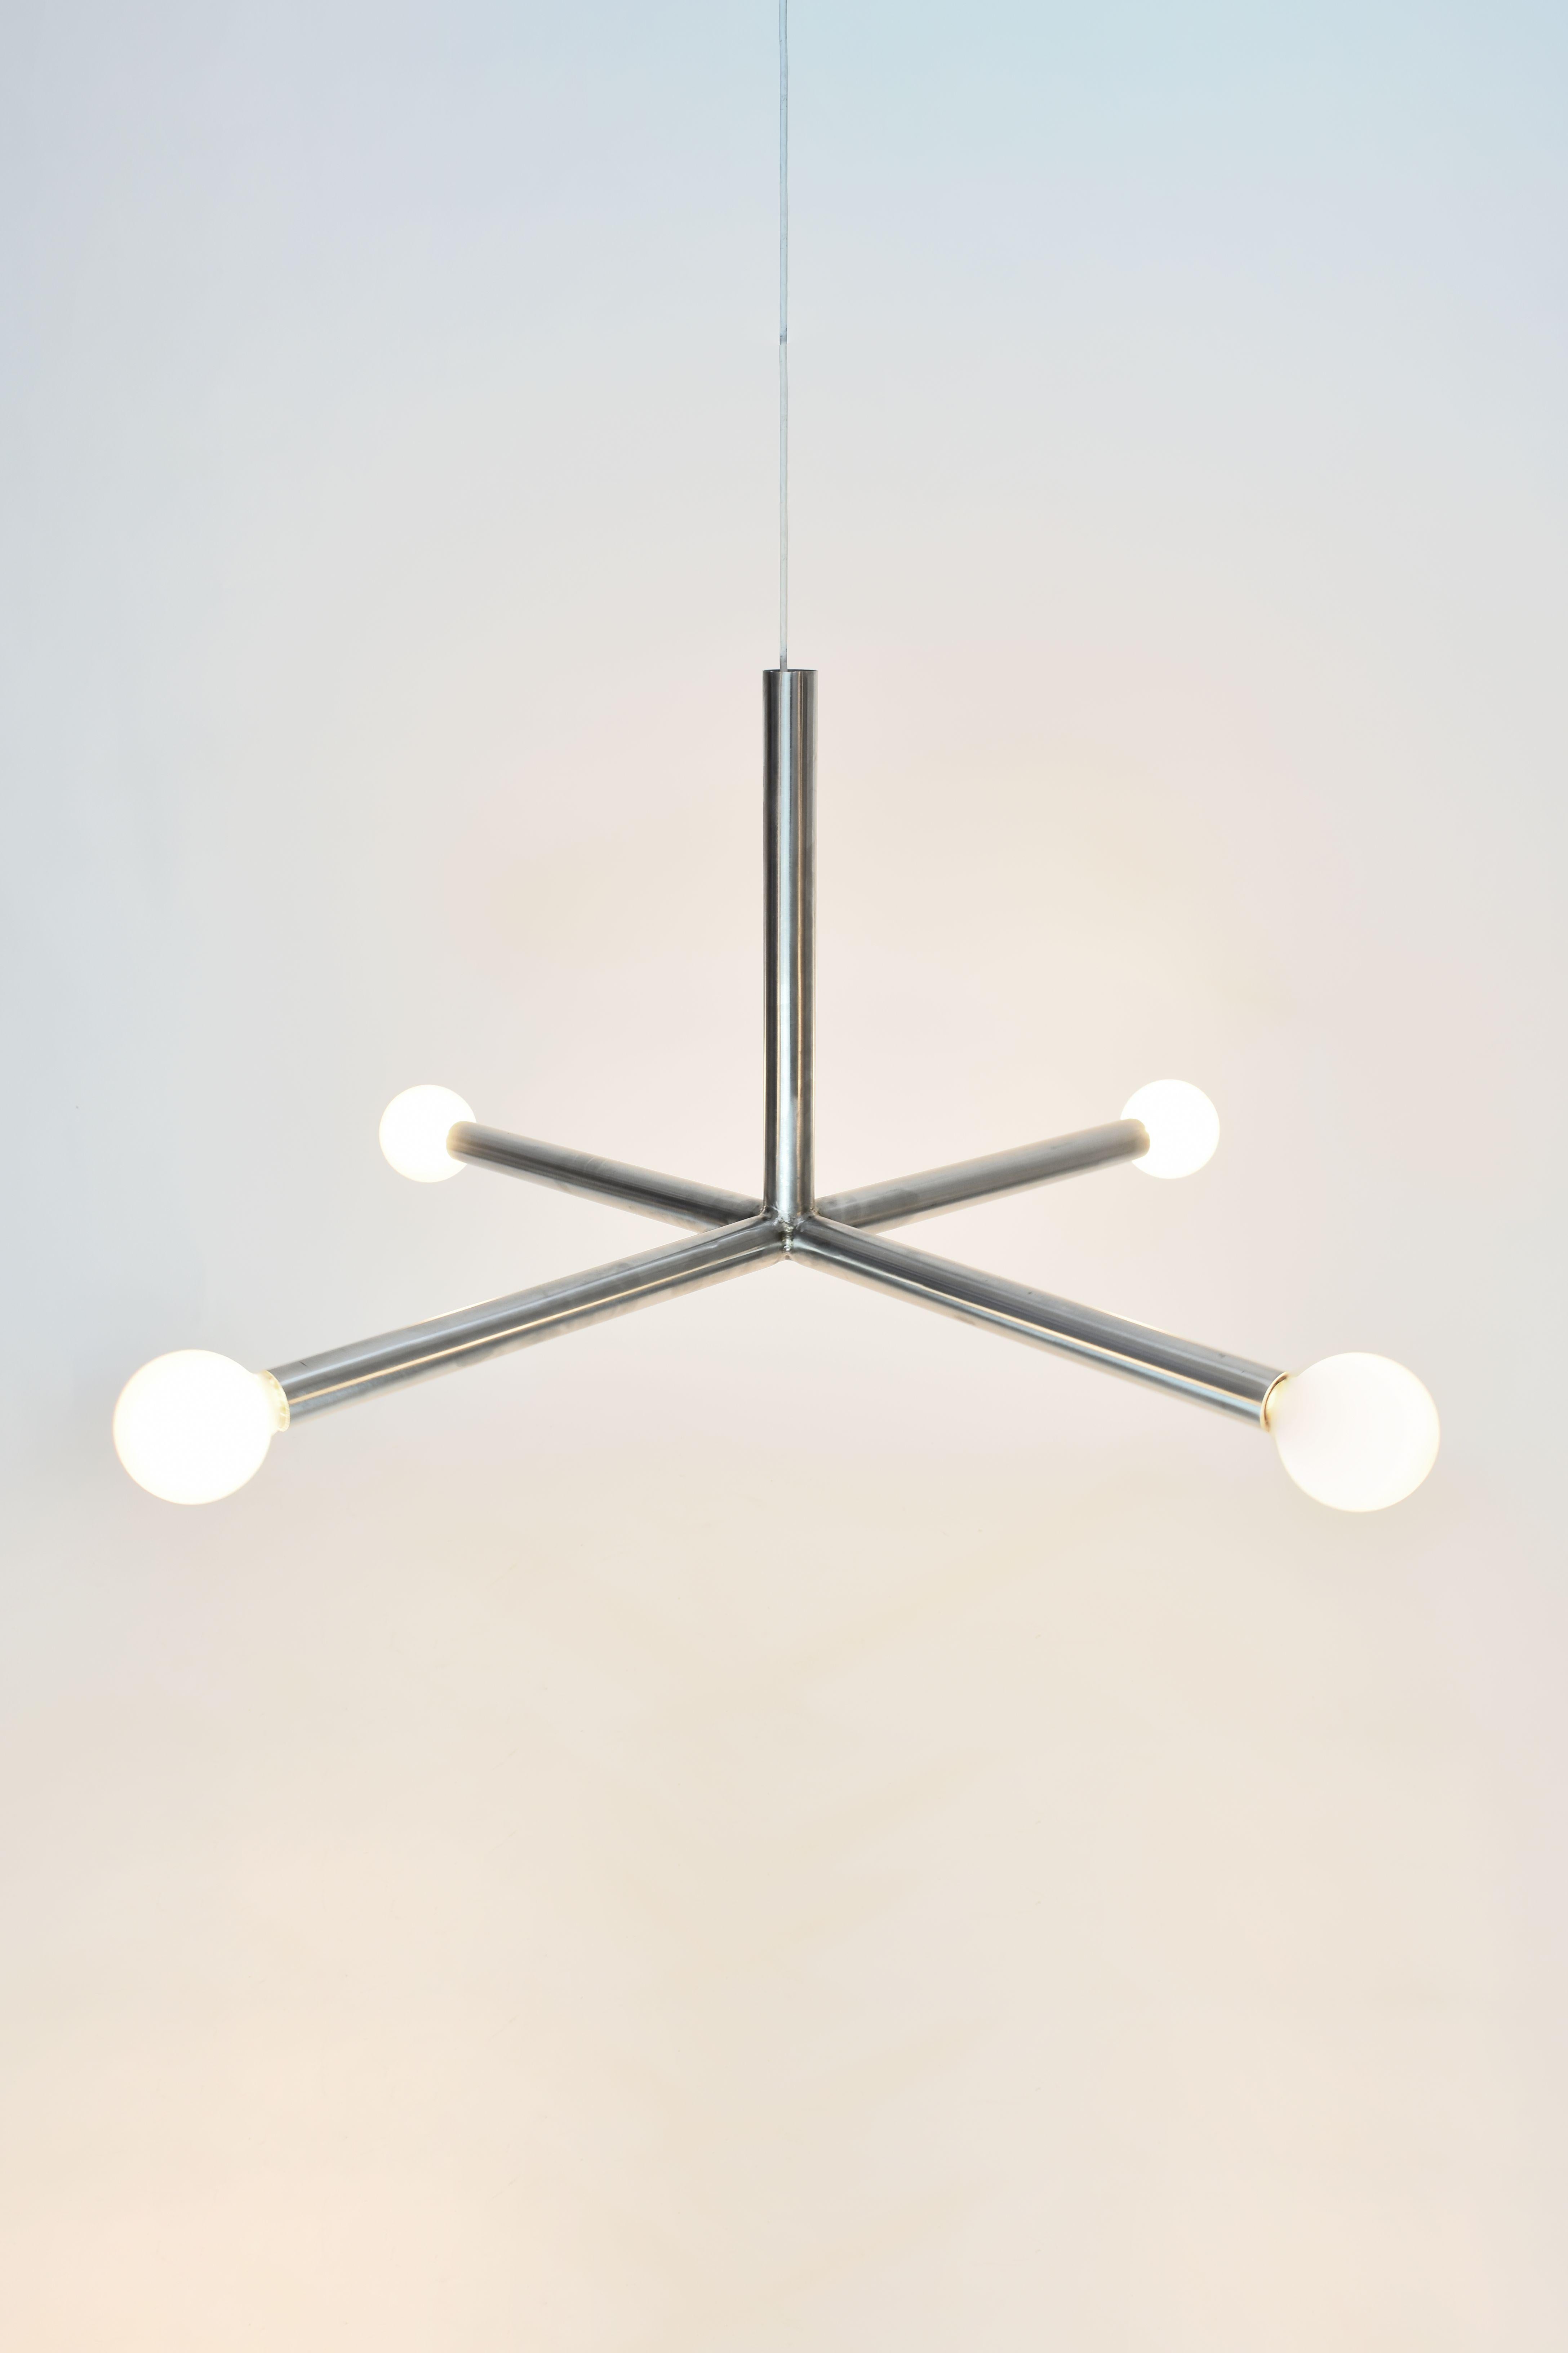 X ceiling lamp by Studio Kuhlmann,
2020
Materials: Stainless steel
Dimensions: 90 × 90 × 45 cm

All our lamps can be wired according to each country. If sold to the USA it will be wired for the USA for instance.


Studio Kuhlmann is run by